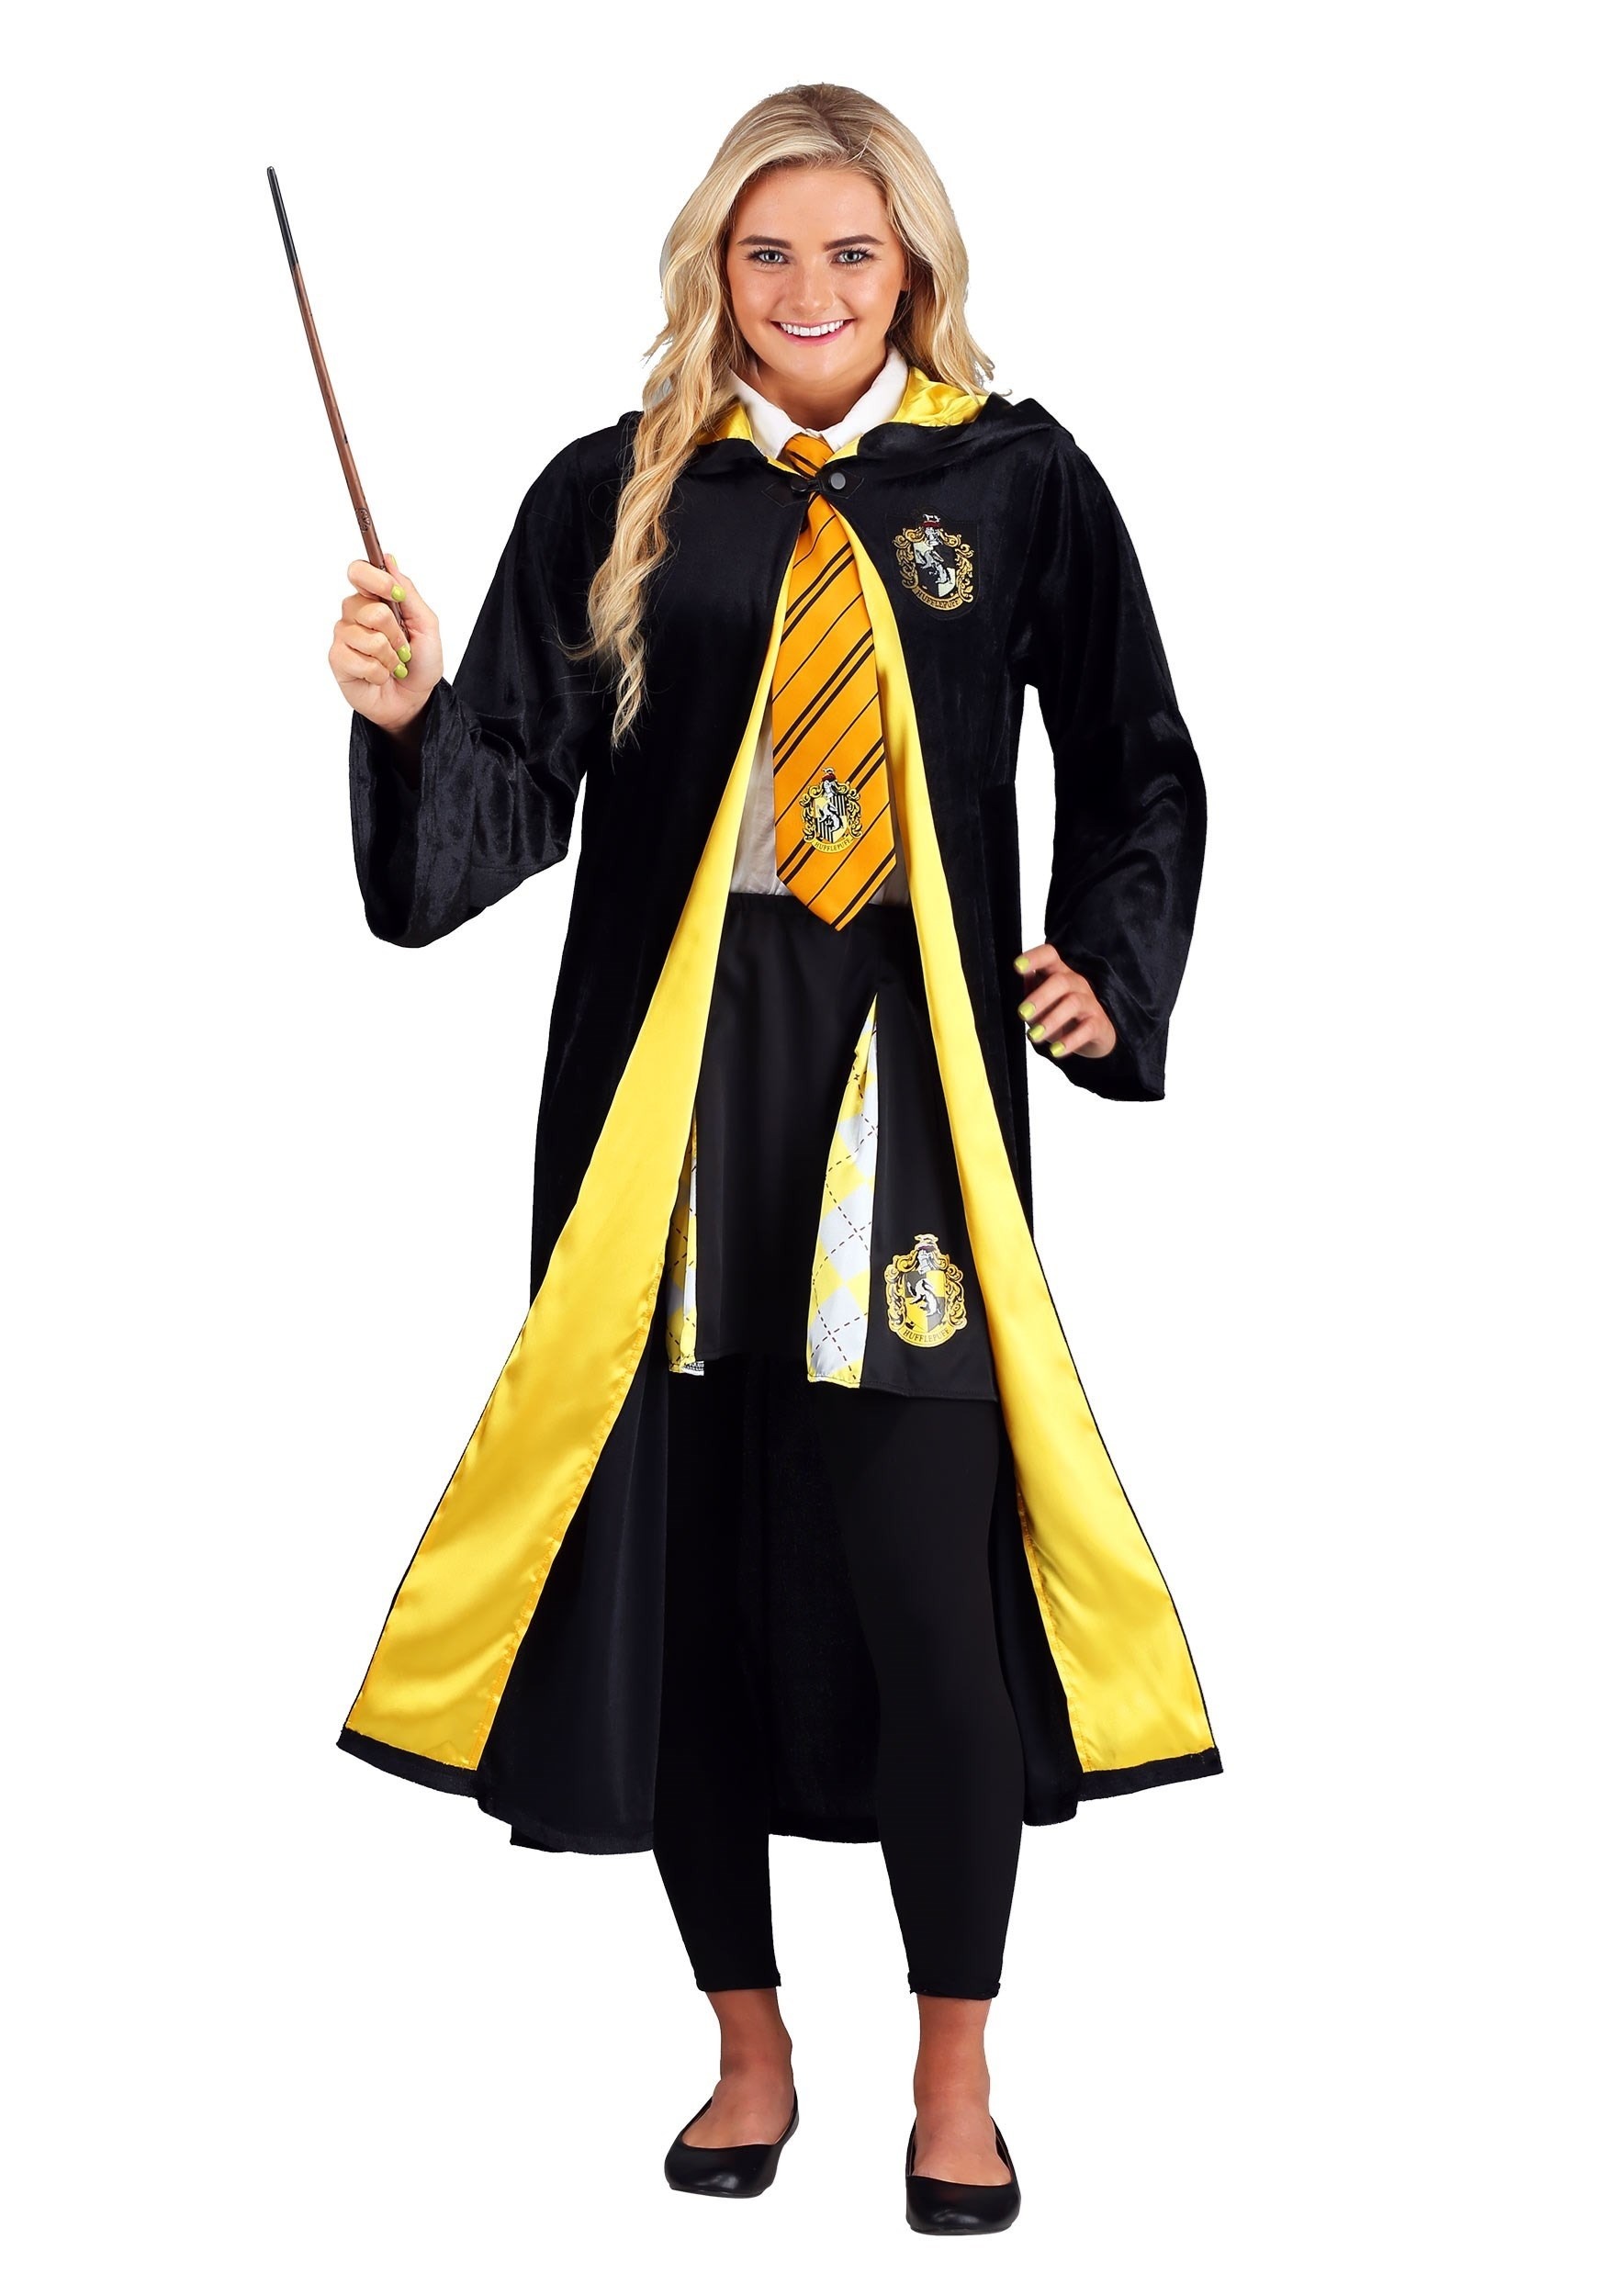 Photos - Fancy Dress Potter Jerry Leigh Harry  Deluxe Adult Hufflepuff Robe  Costume 